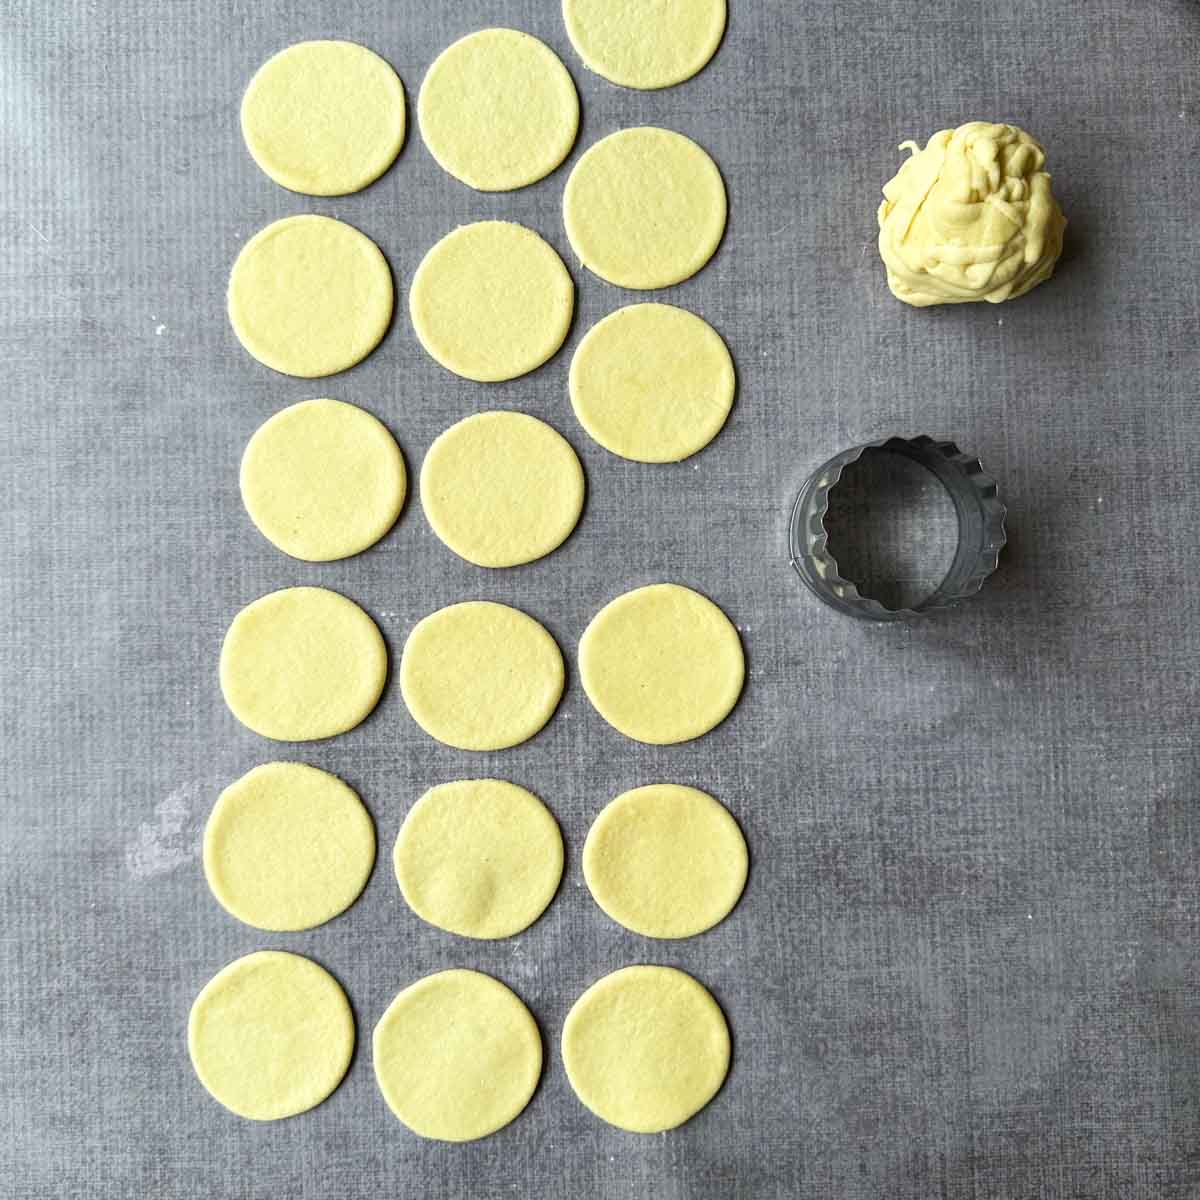 2 inch diameter cookie cutter pictured with pani puri circles made with semolina flour